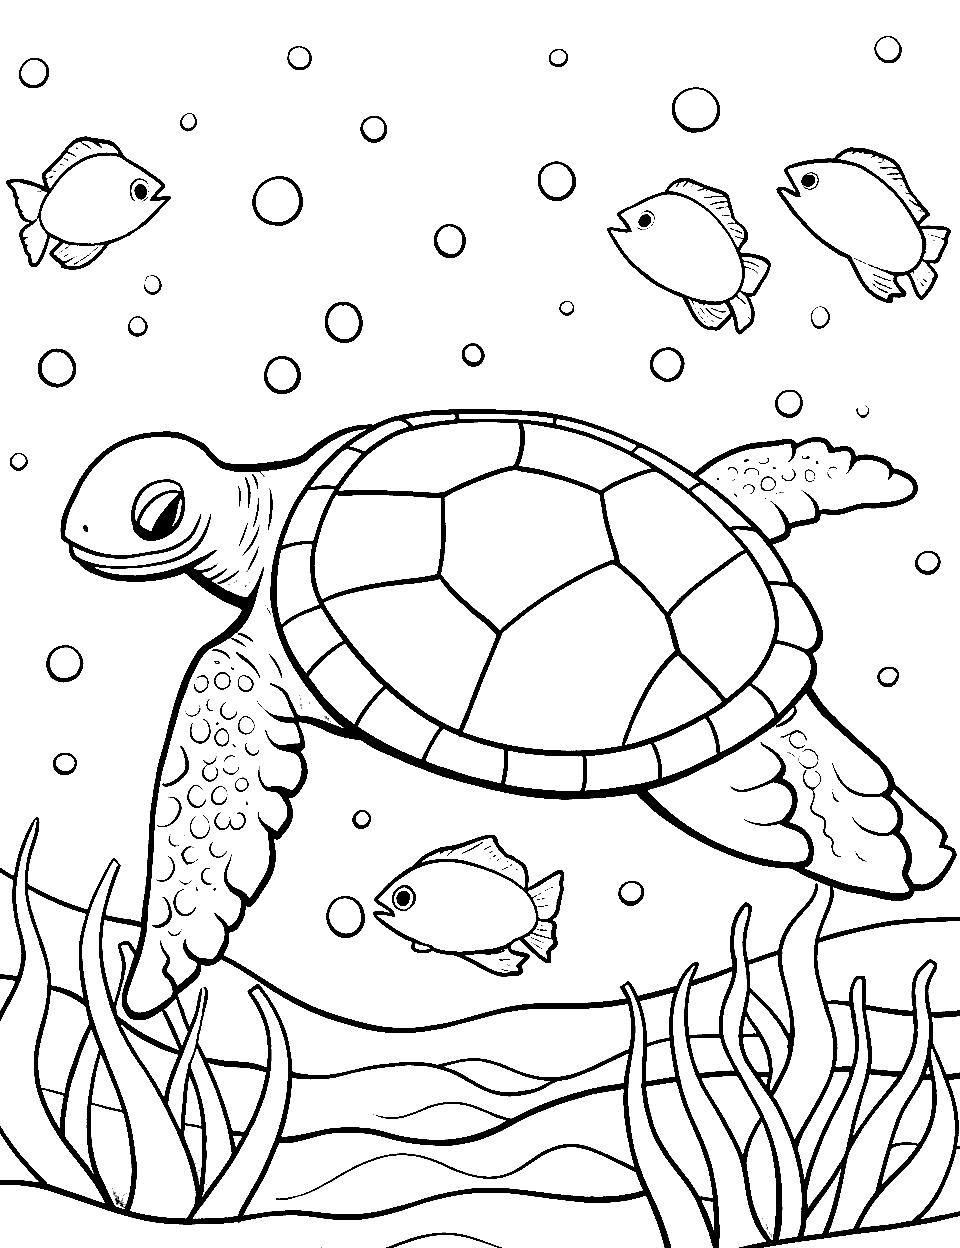 Turtle's Ocean Friends Turtle Coloring Page - A turtle surrounded by fishes.